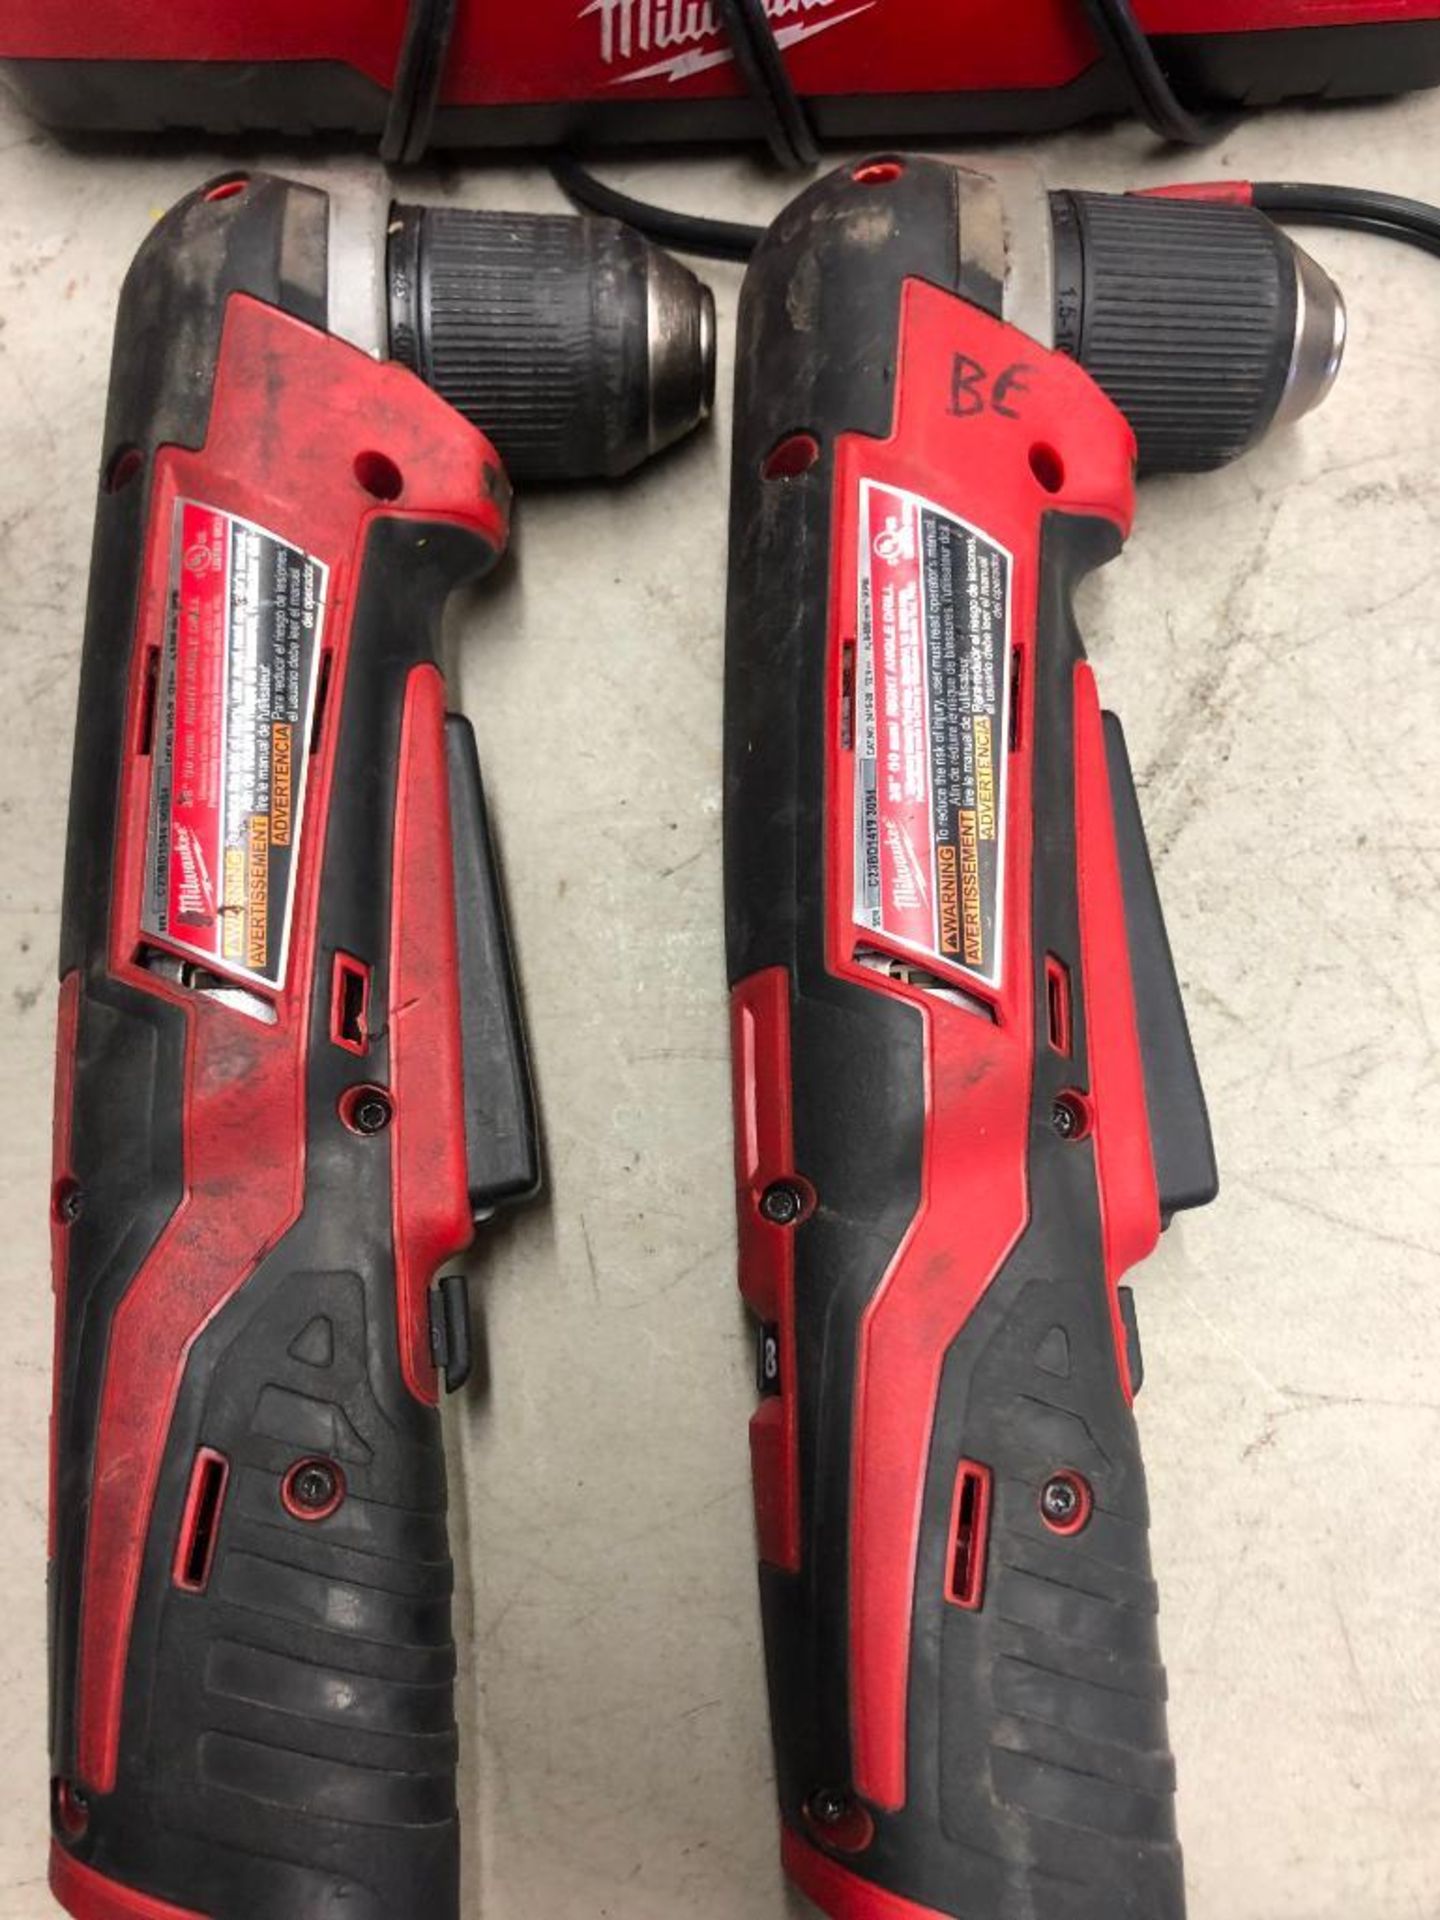 (2) MILWAUKEE CORDLESS 3/8'' RIGHT ANGLE DRILLS, W/ (1) BATTERY AND 4-STATION CHARGER - Image 2 of 3